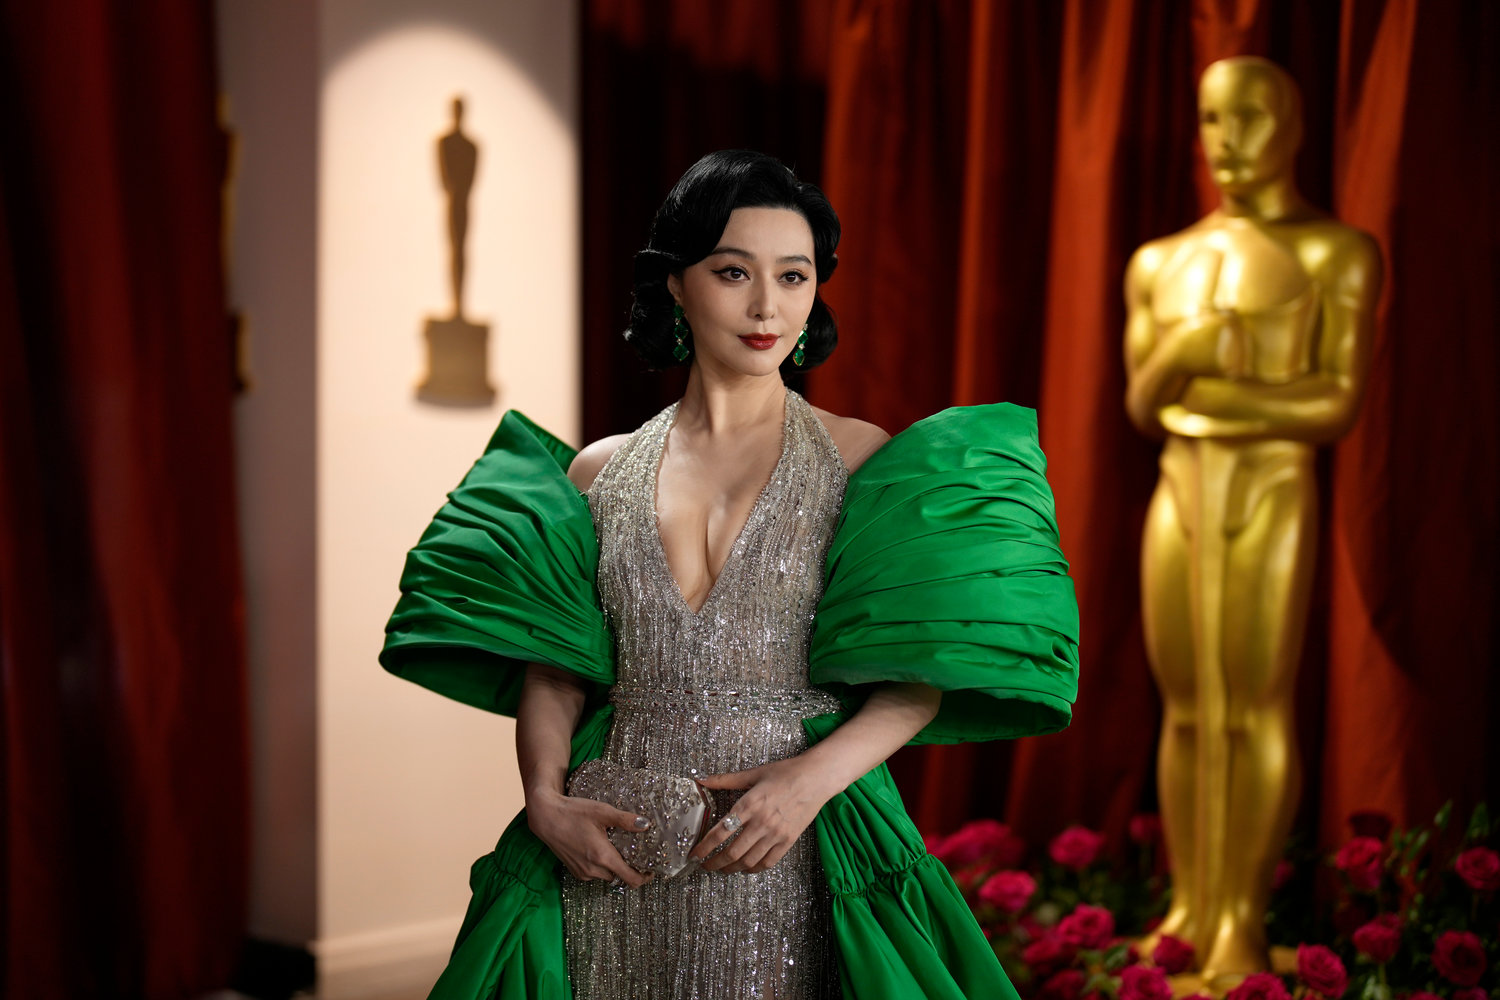 Fan Bingbing arrives at the Oscars on Sunday, March 12, 2023, at the Dolby Theatre in Los Angeles. (AP Photo/John Locher)